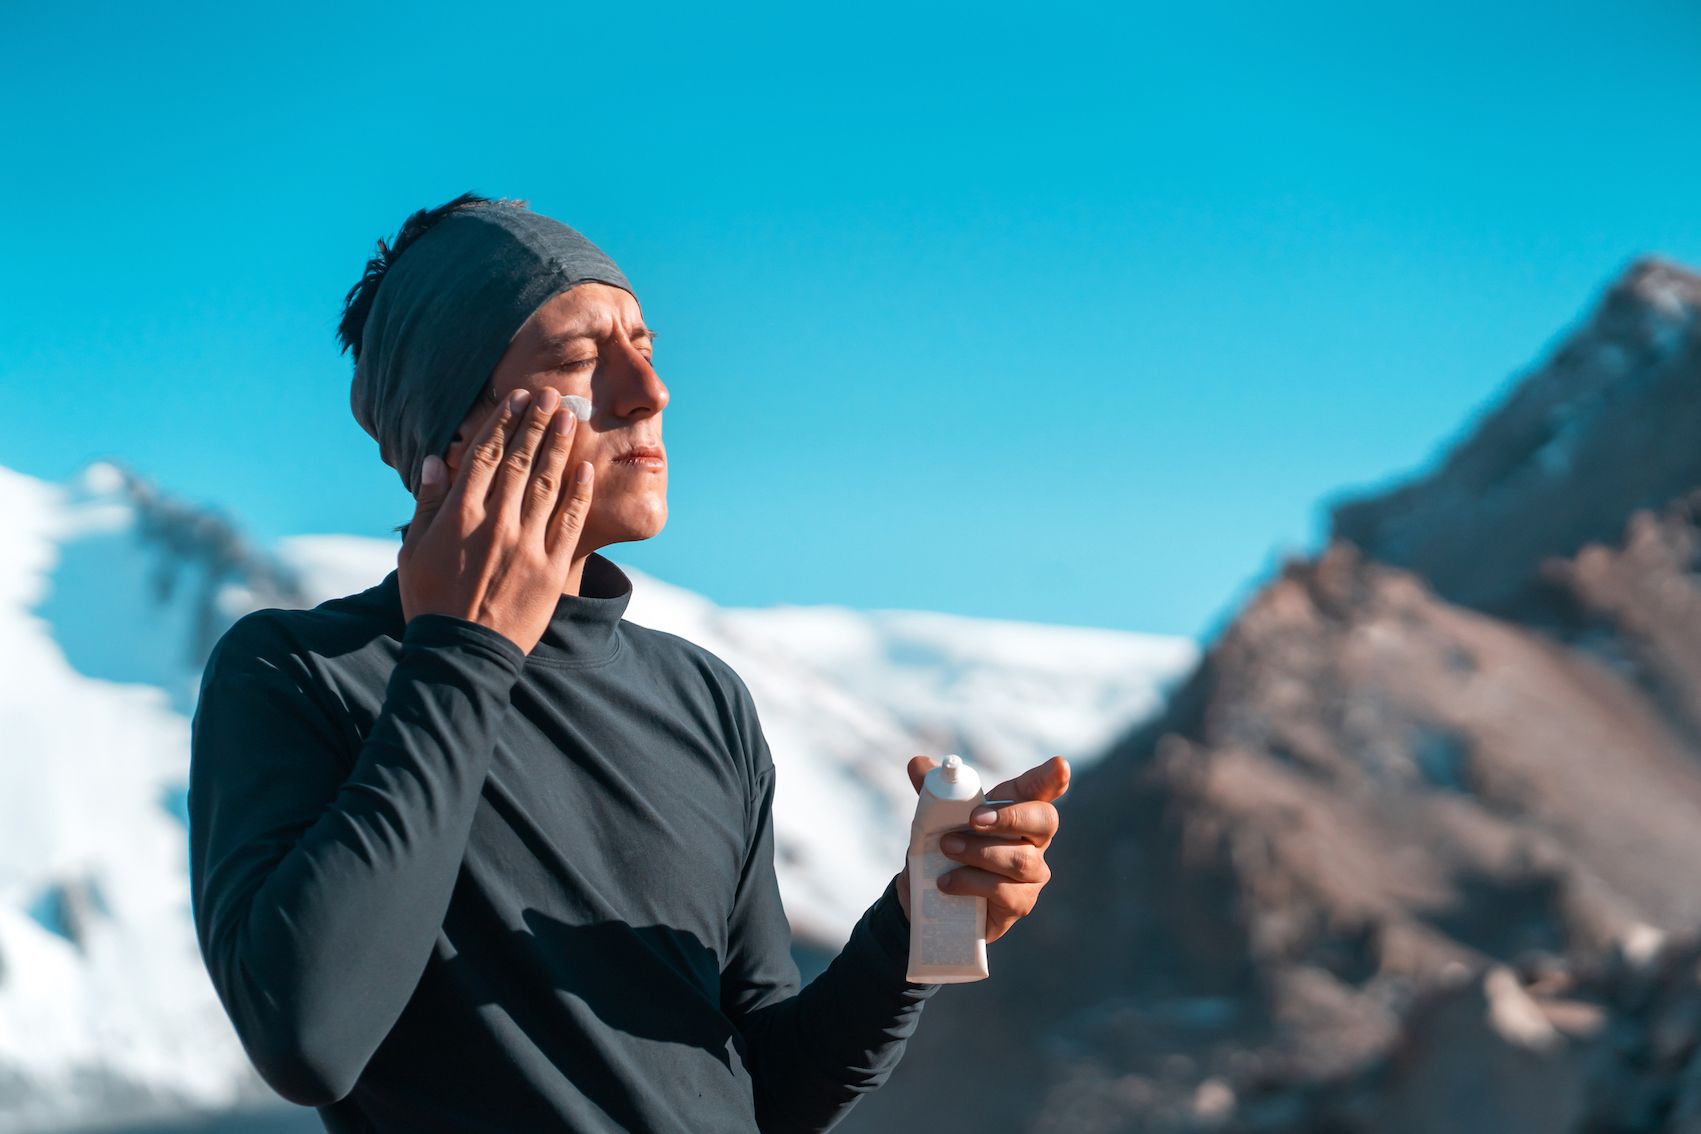 A man applying suncream with snowy mountains in the background, on a sunny day.